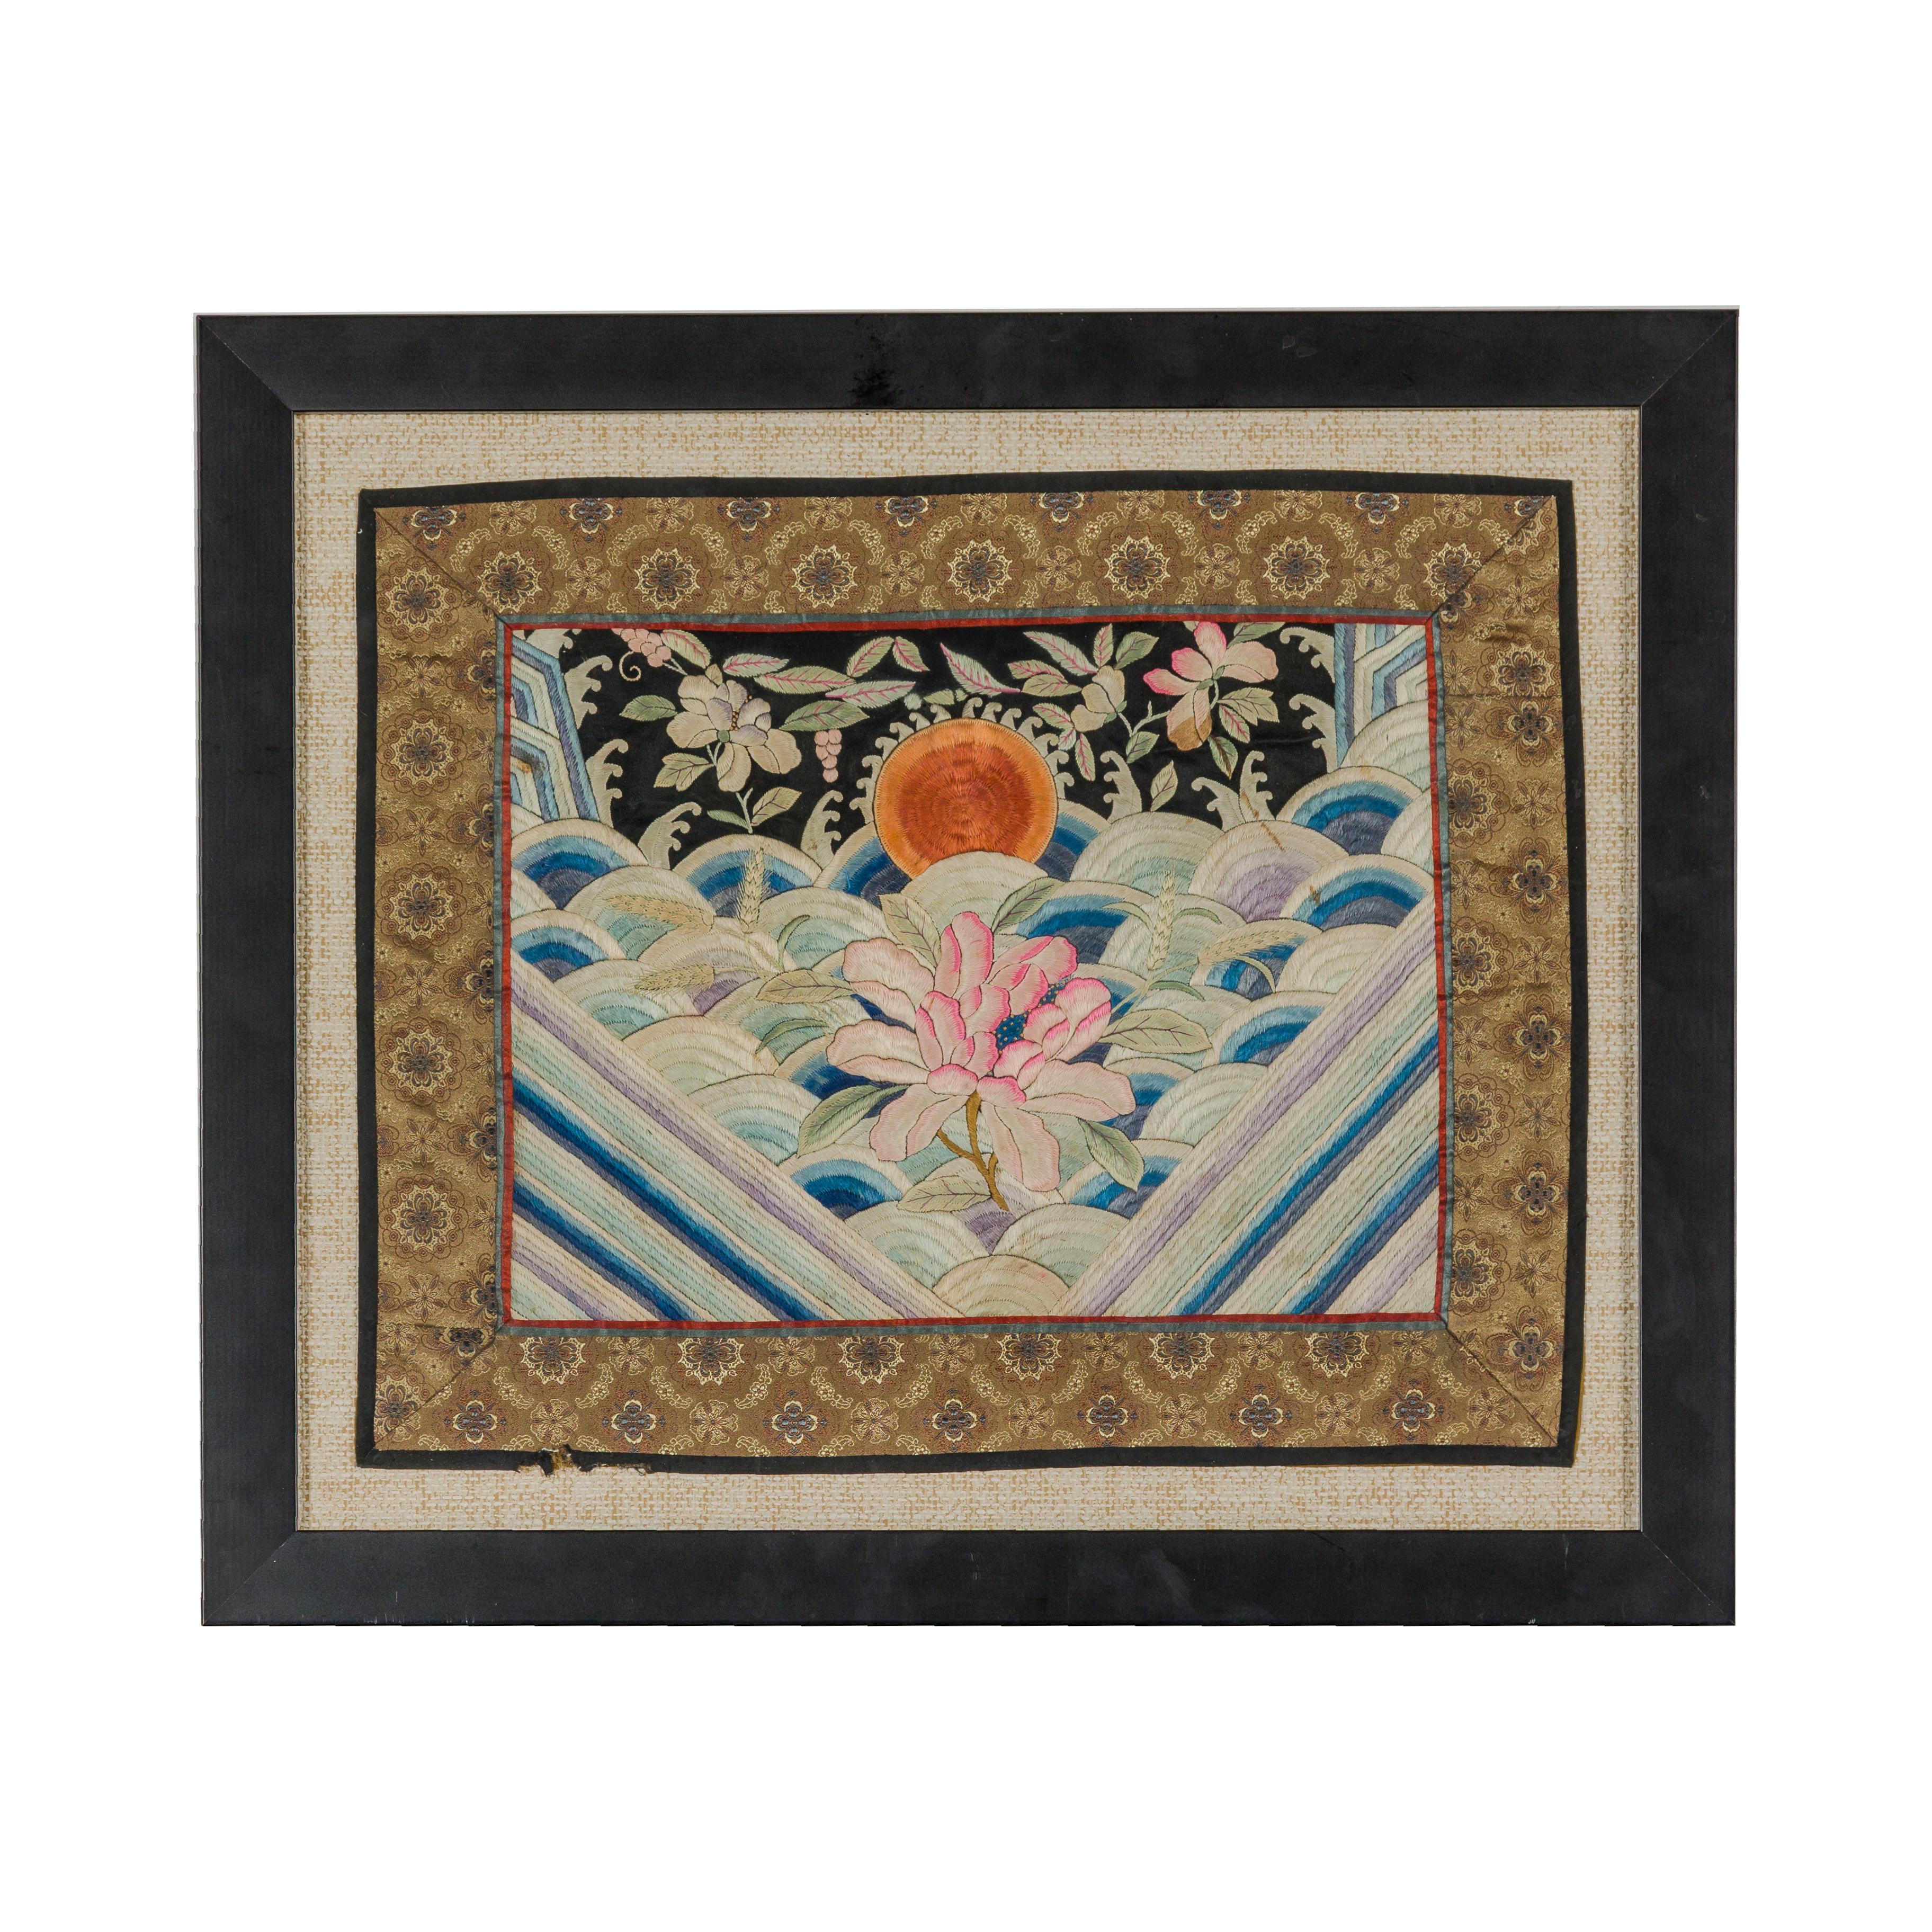 A vintage Chinese silk fabric depicting pink flowers, waves and the sun set in a black custom made frame, under glass. This vintage Chinese silk fabric, elegantly framed under glass, is a piece steeped in history and beauty. Once perhaps a segment